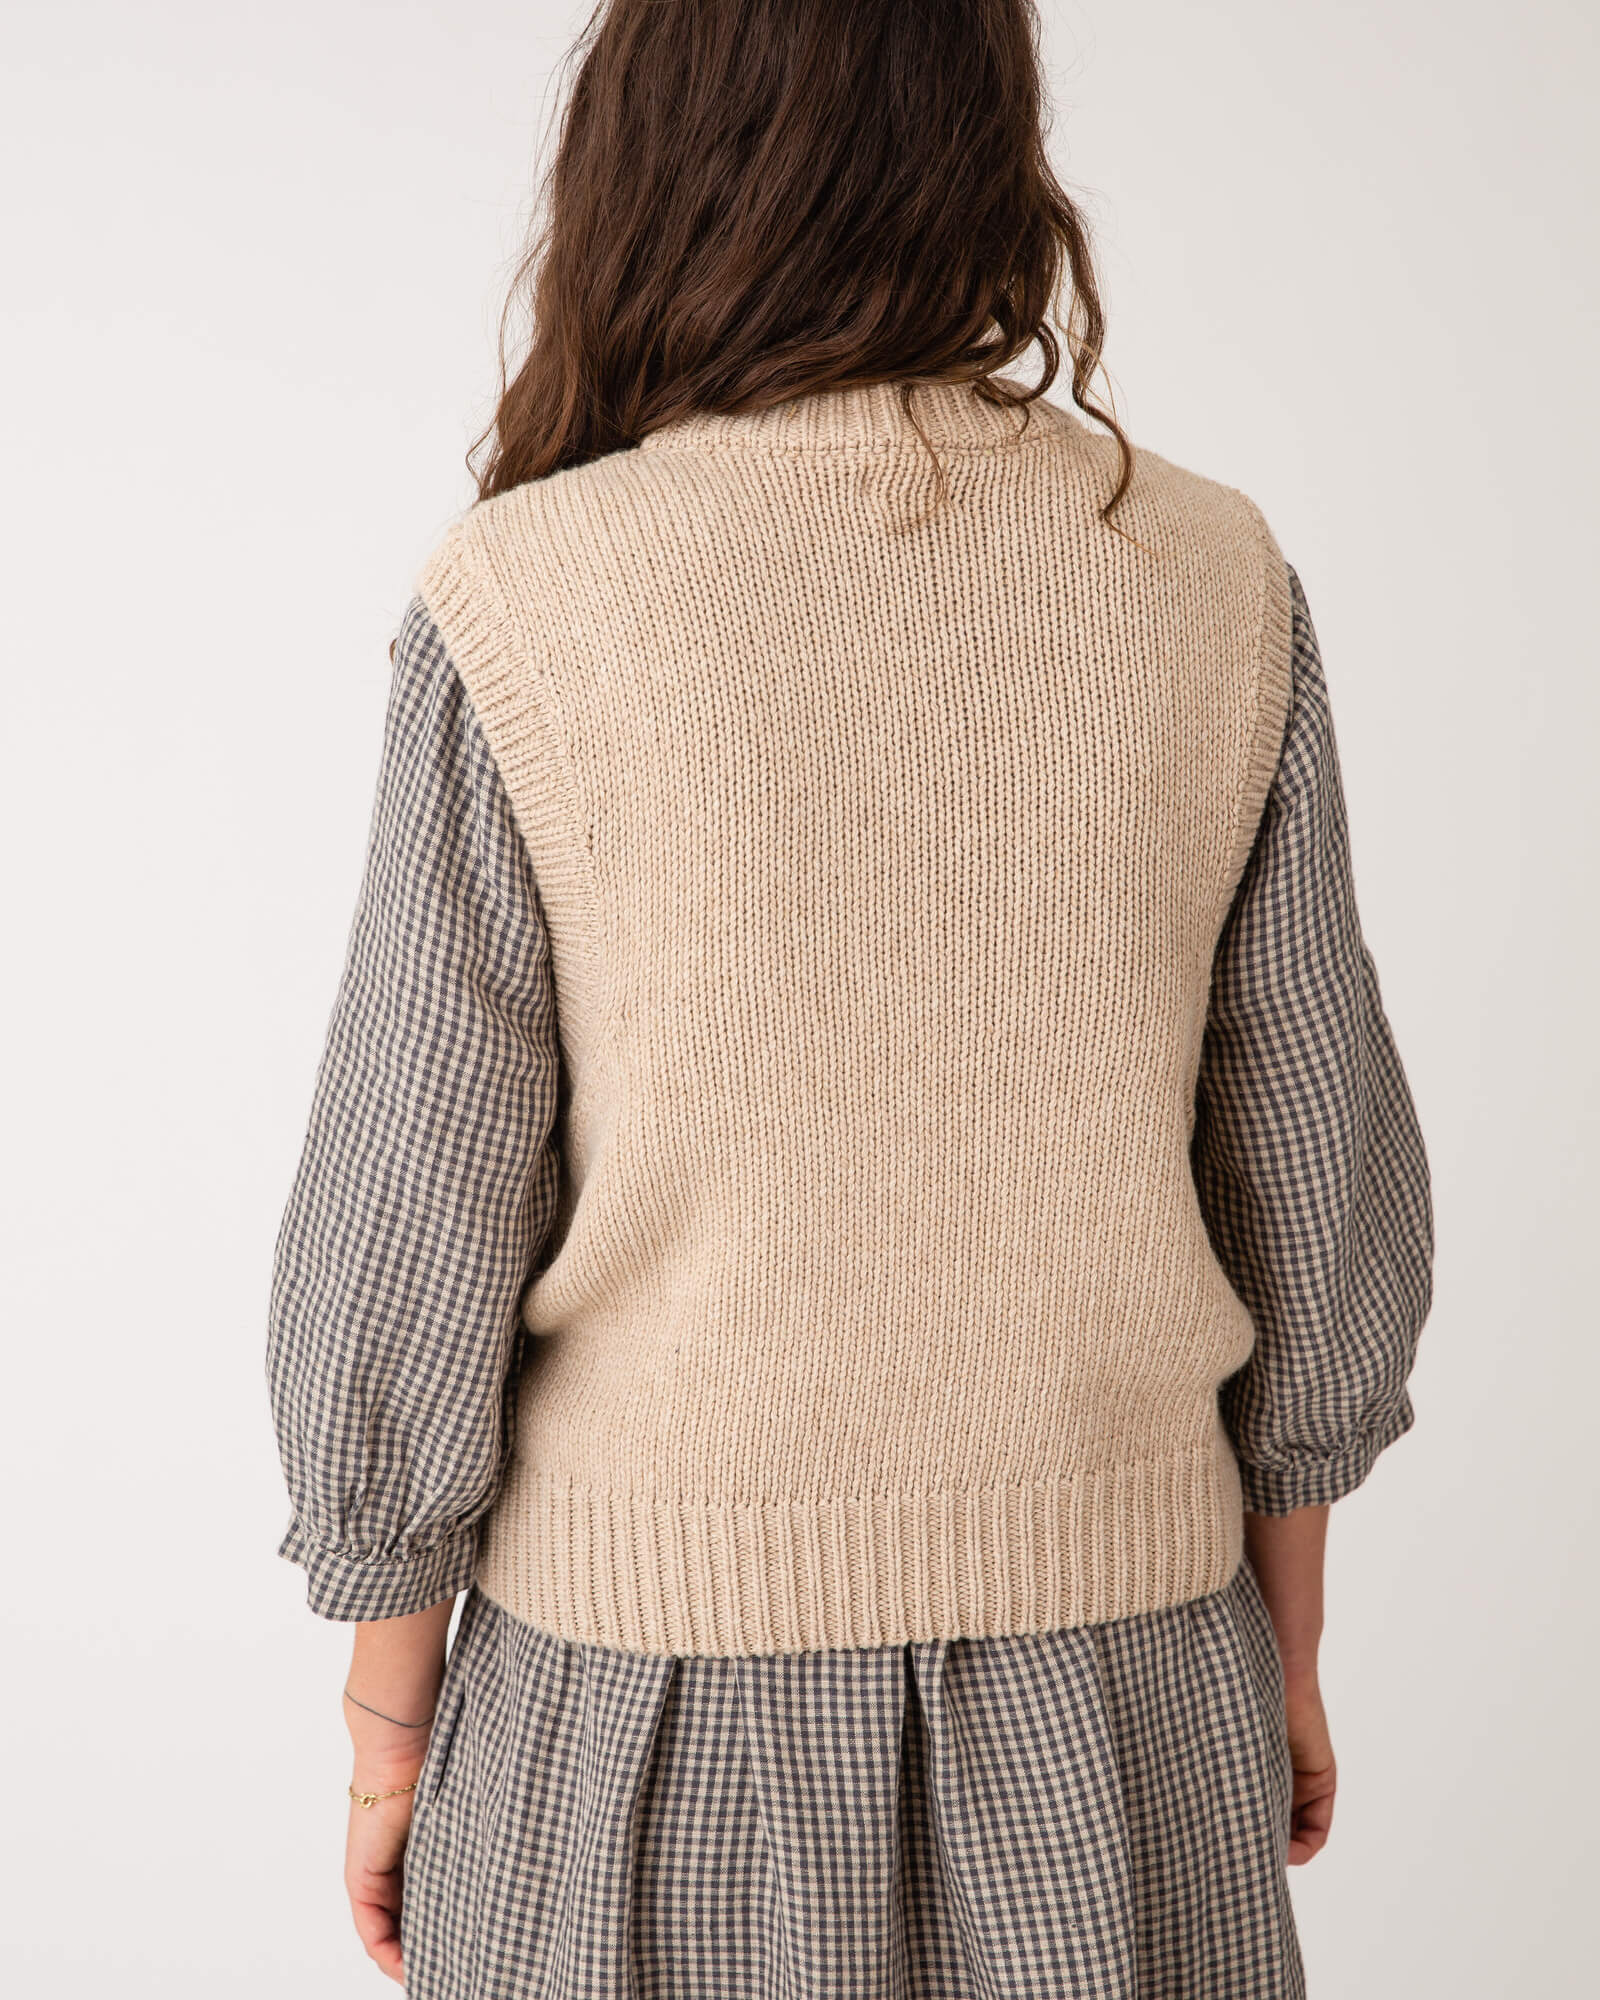 Brown limestone sweater vest made from recycled wool from Matona